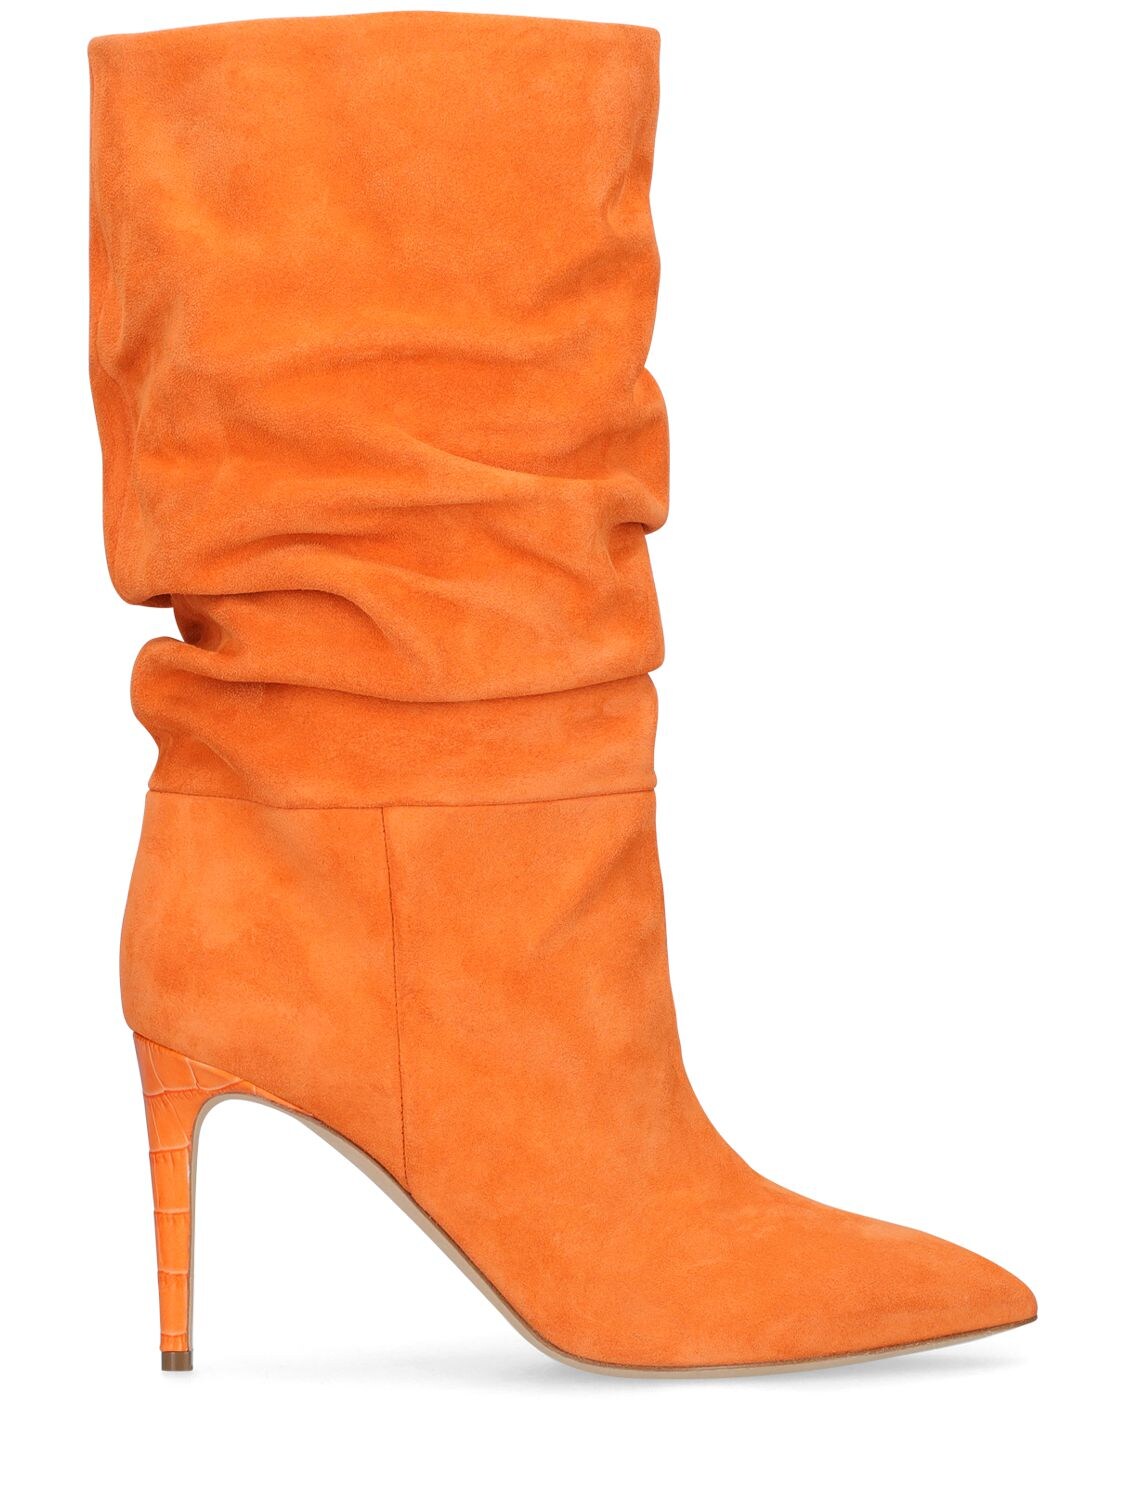 85mm Slouchy Suede Boots